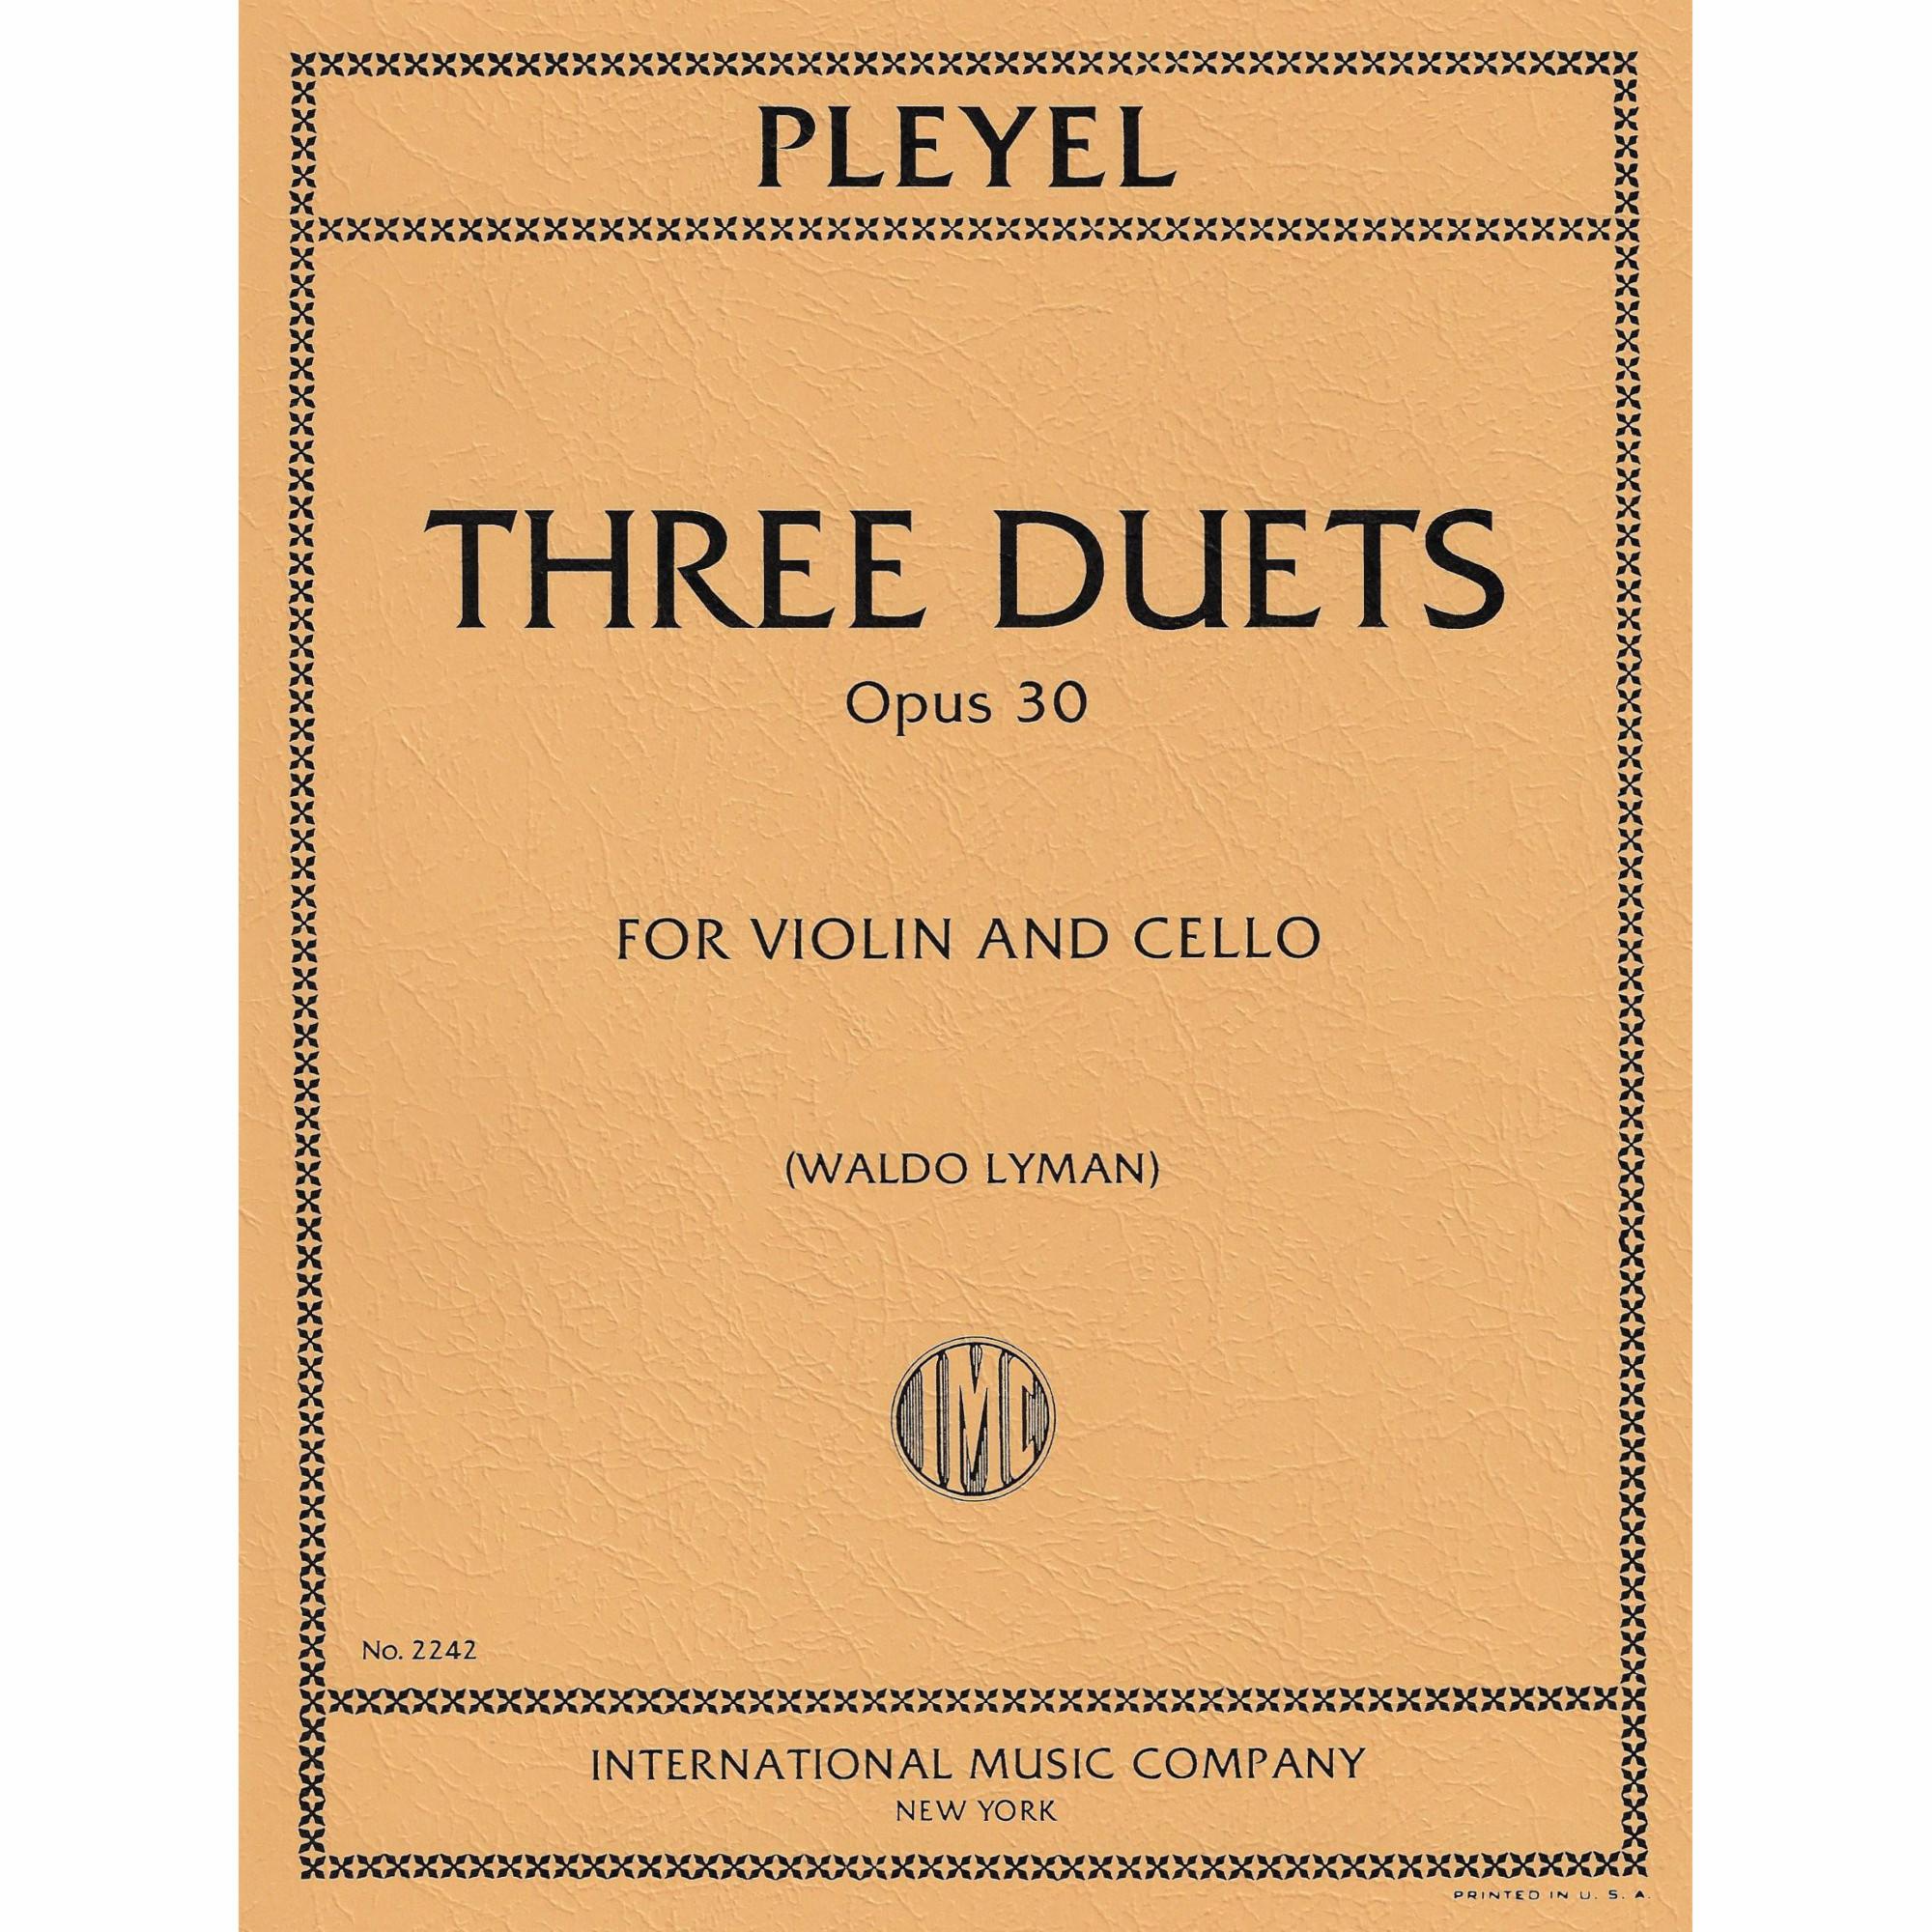 Pleyel -- Three Duets, Op. 30 for Violin and Cello